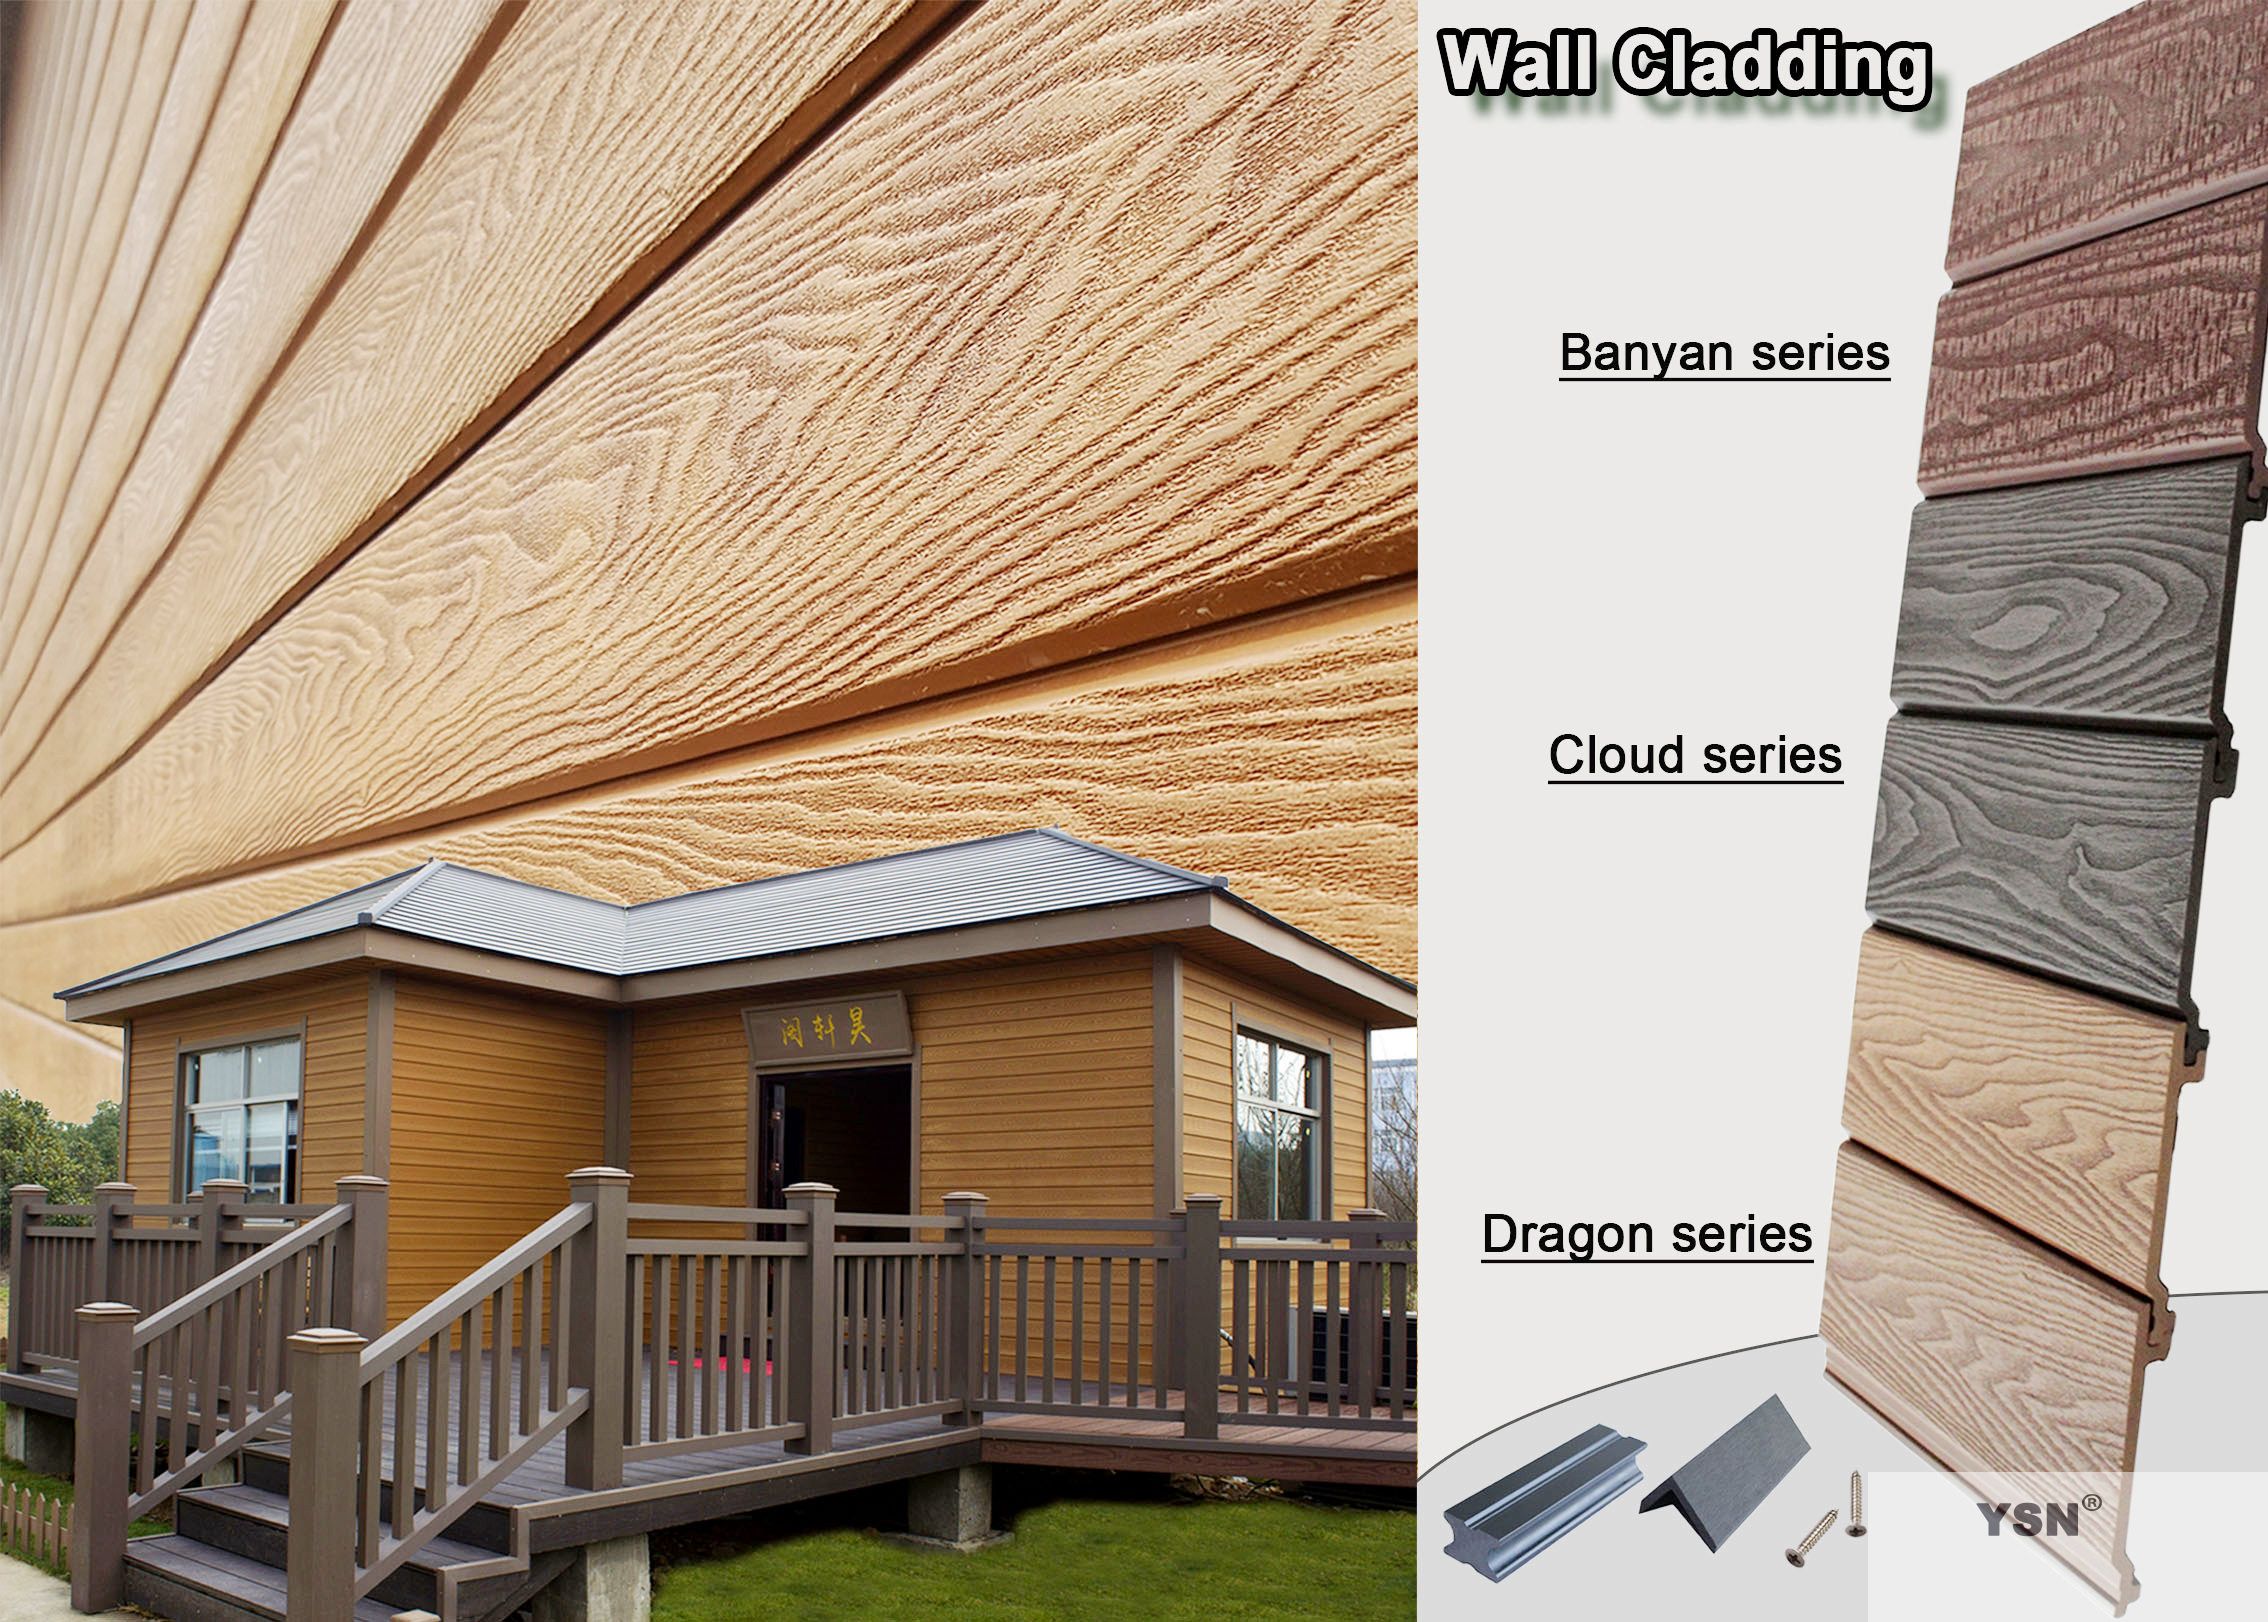 34 Awesome Cladding exterior wood with Photos Design